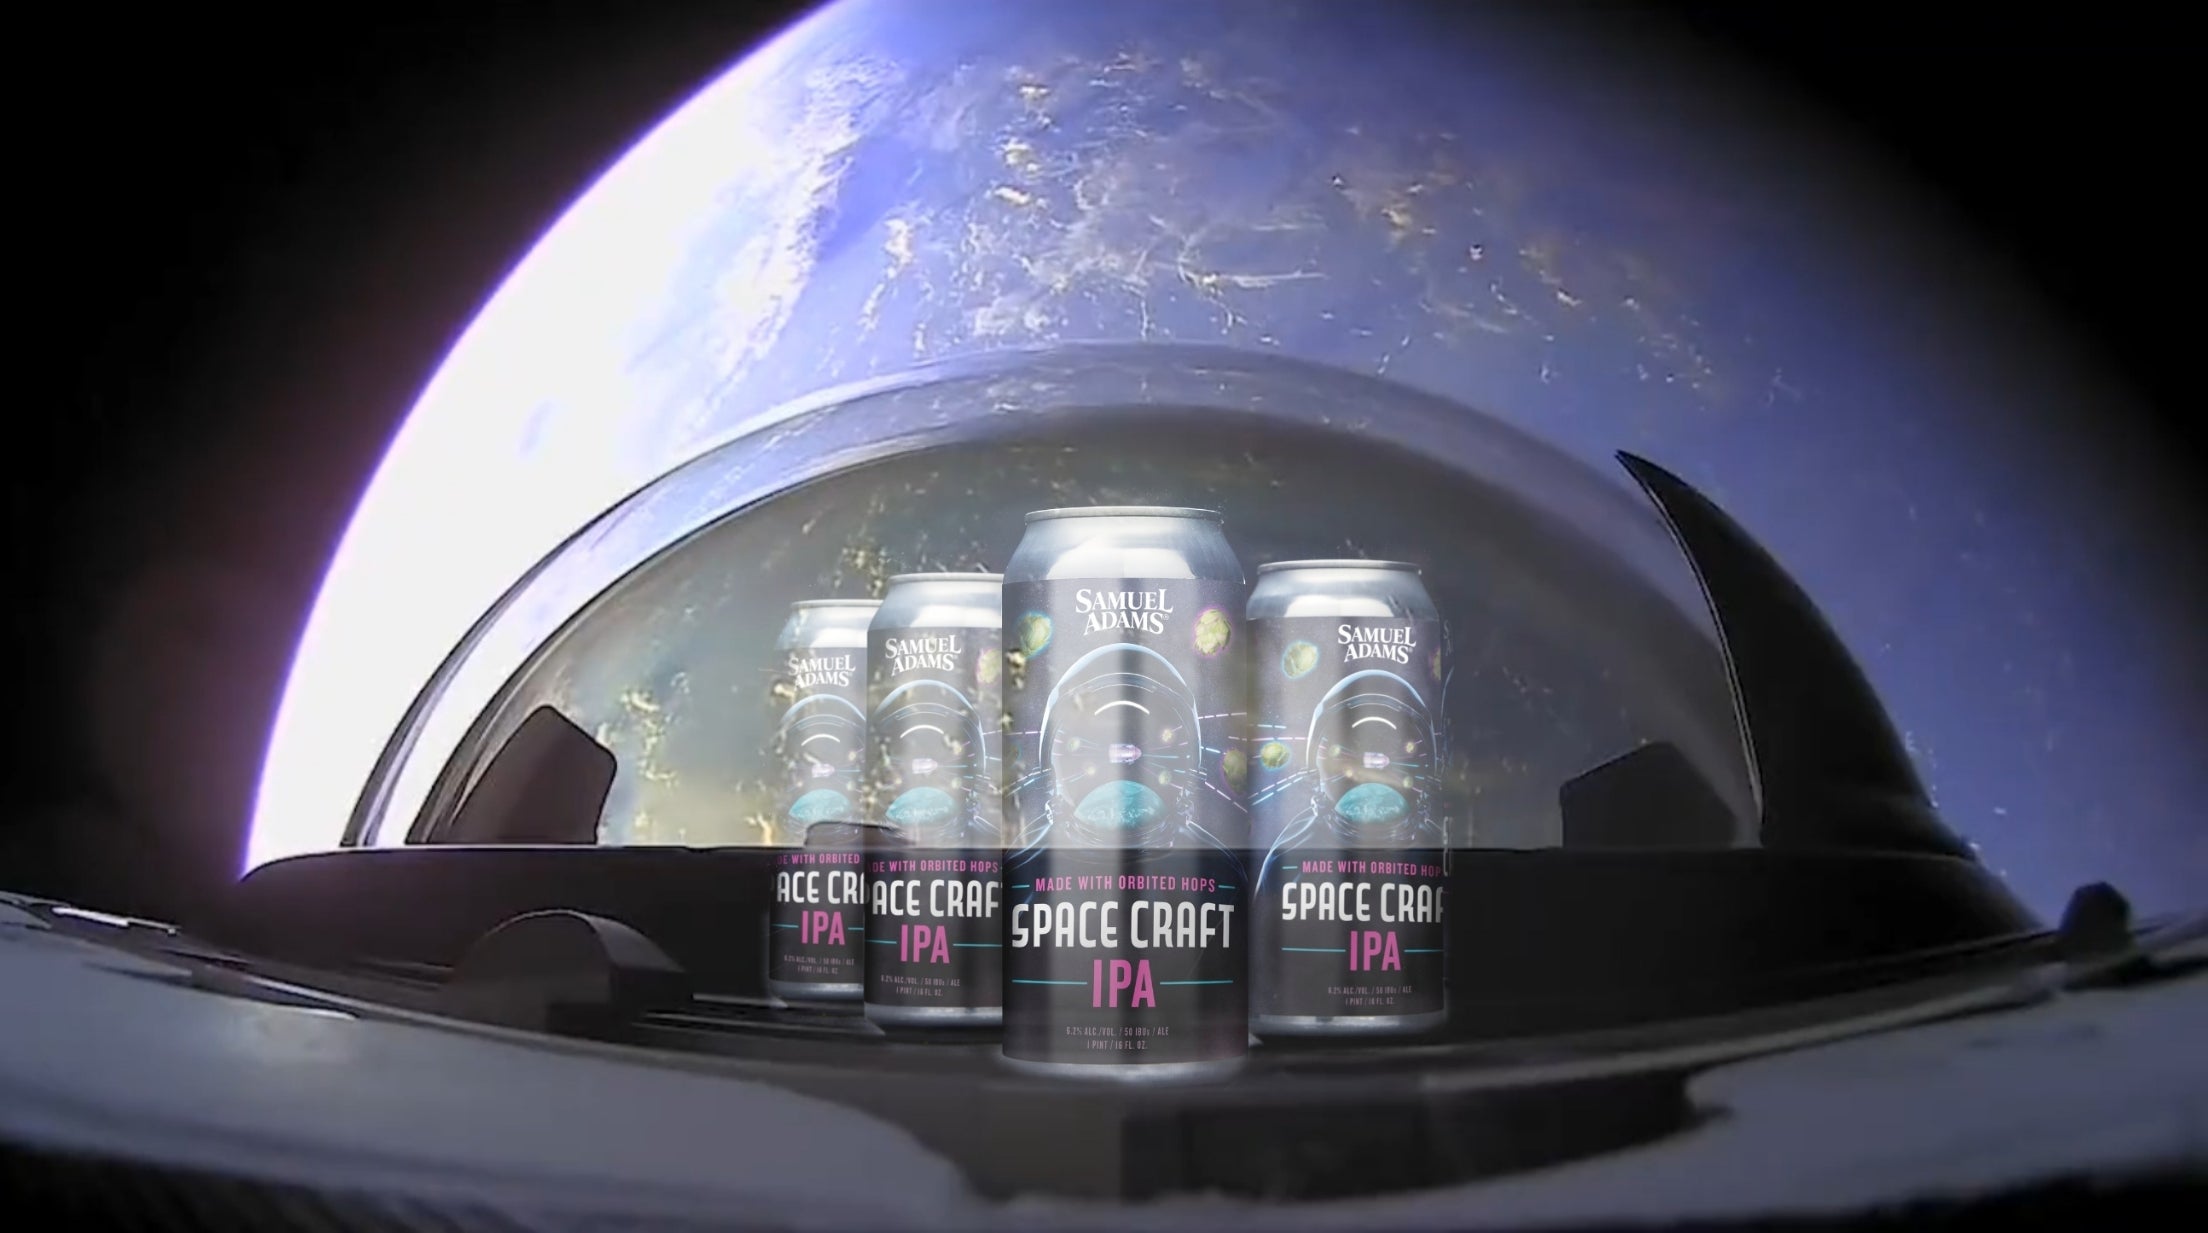 Samuel Adams Launched Hops To Make 'Space Craft' Beer Aboard SpaceX’s Inspiration4 Mission